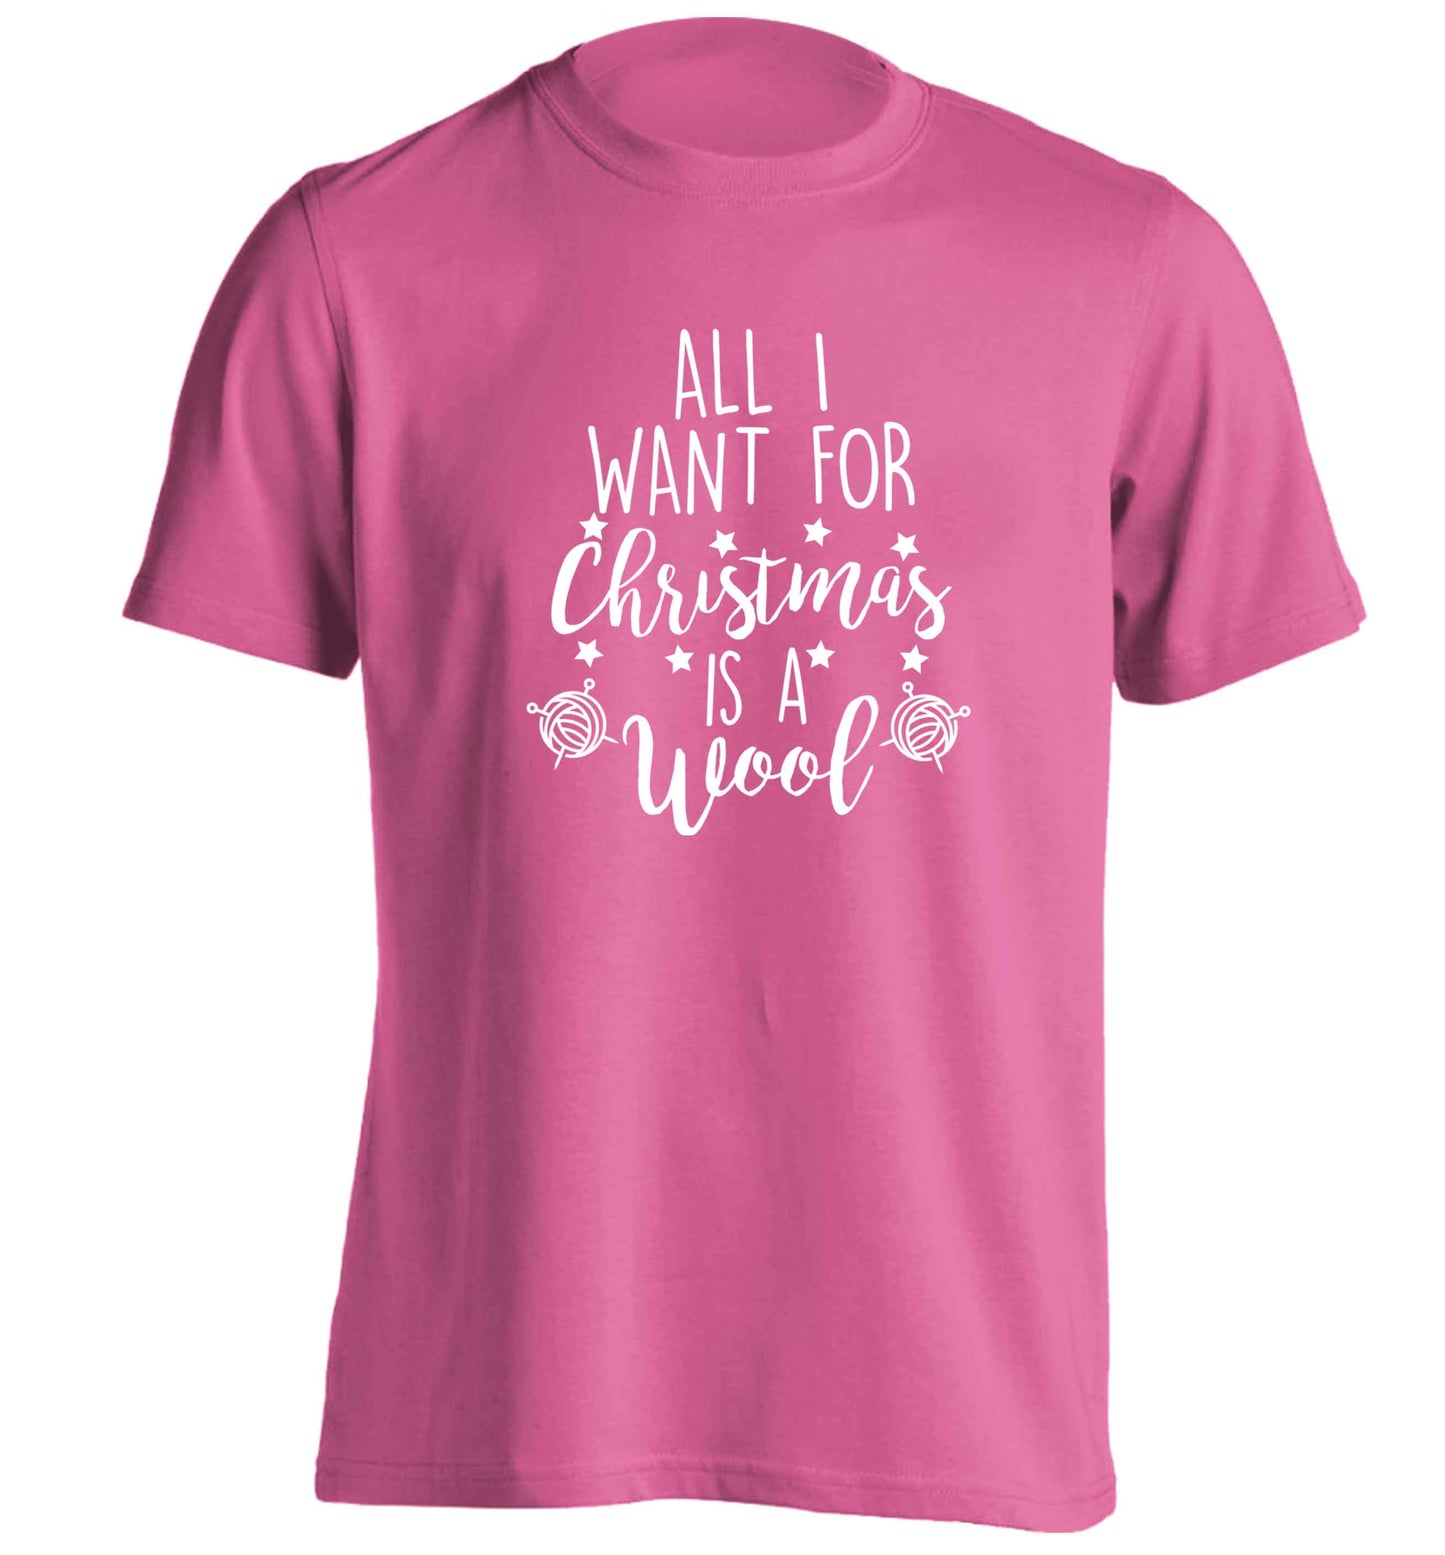 All I want for Christmas is wool! adults unisex pink Tshirt 2XL